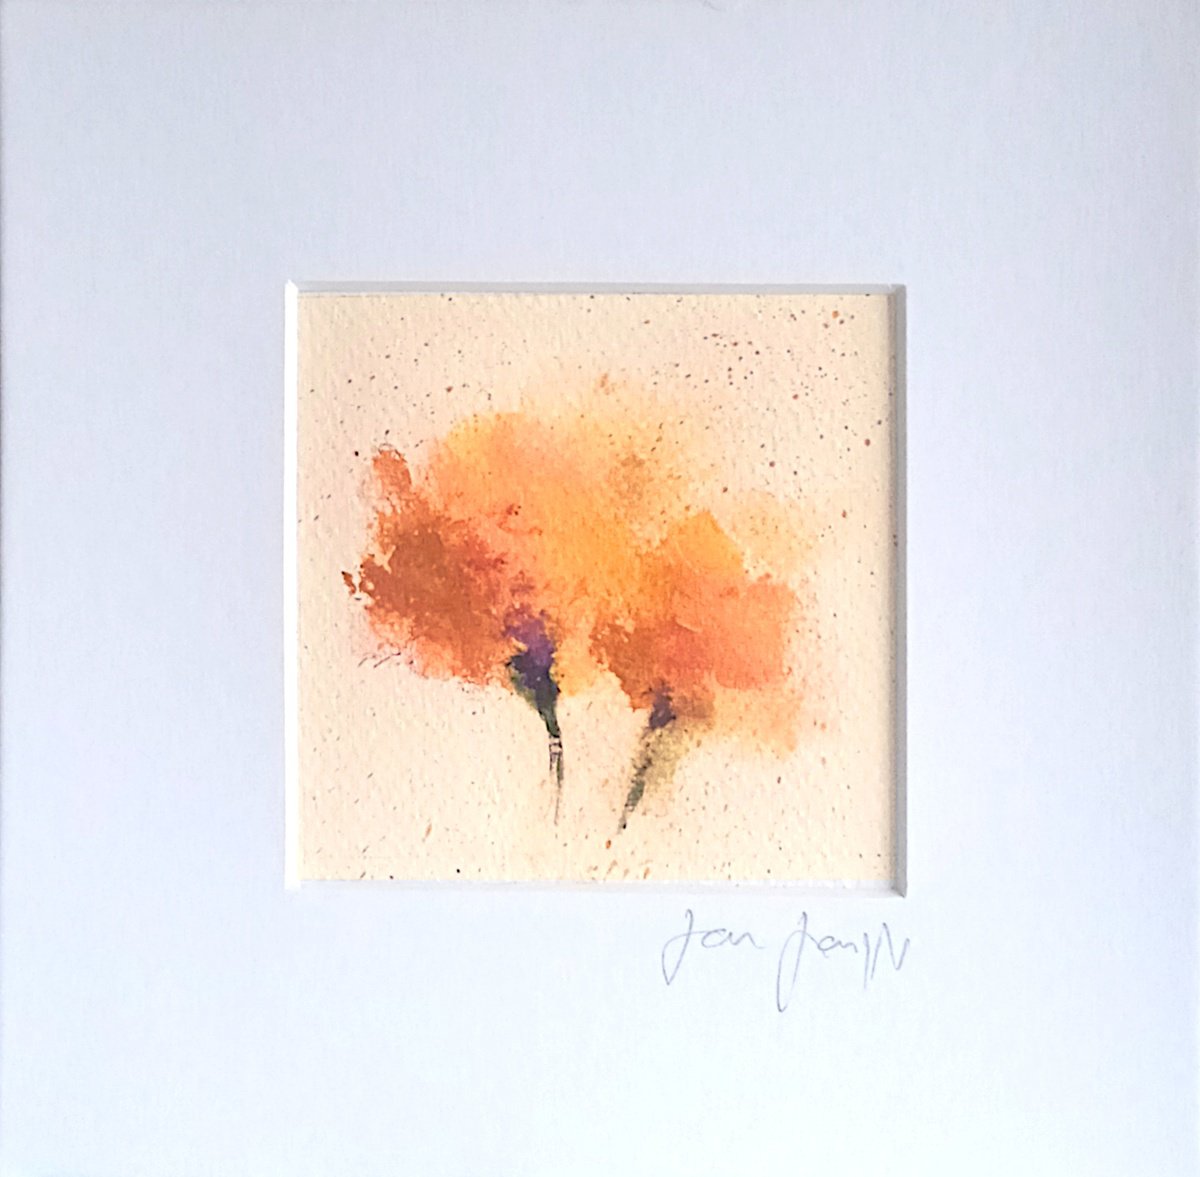 Floral 22 - Small abstract floral painting by Jon Joseph